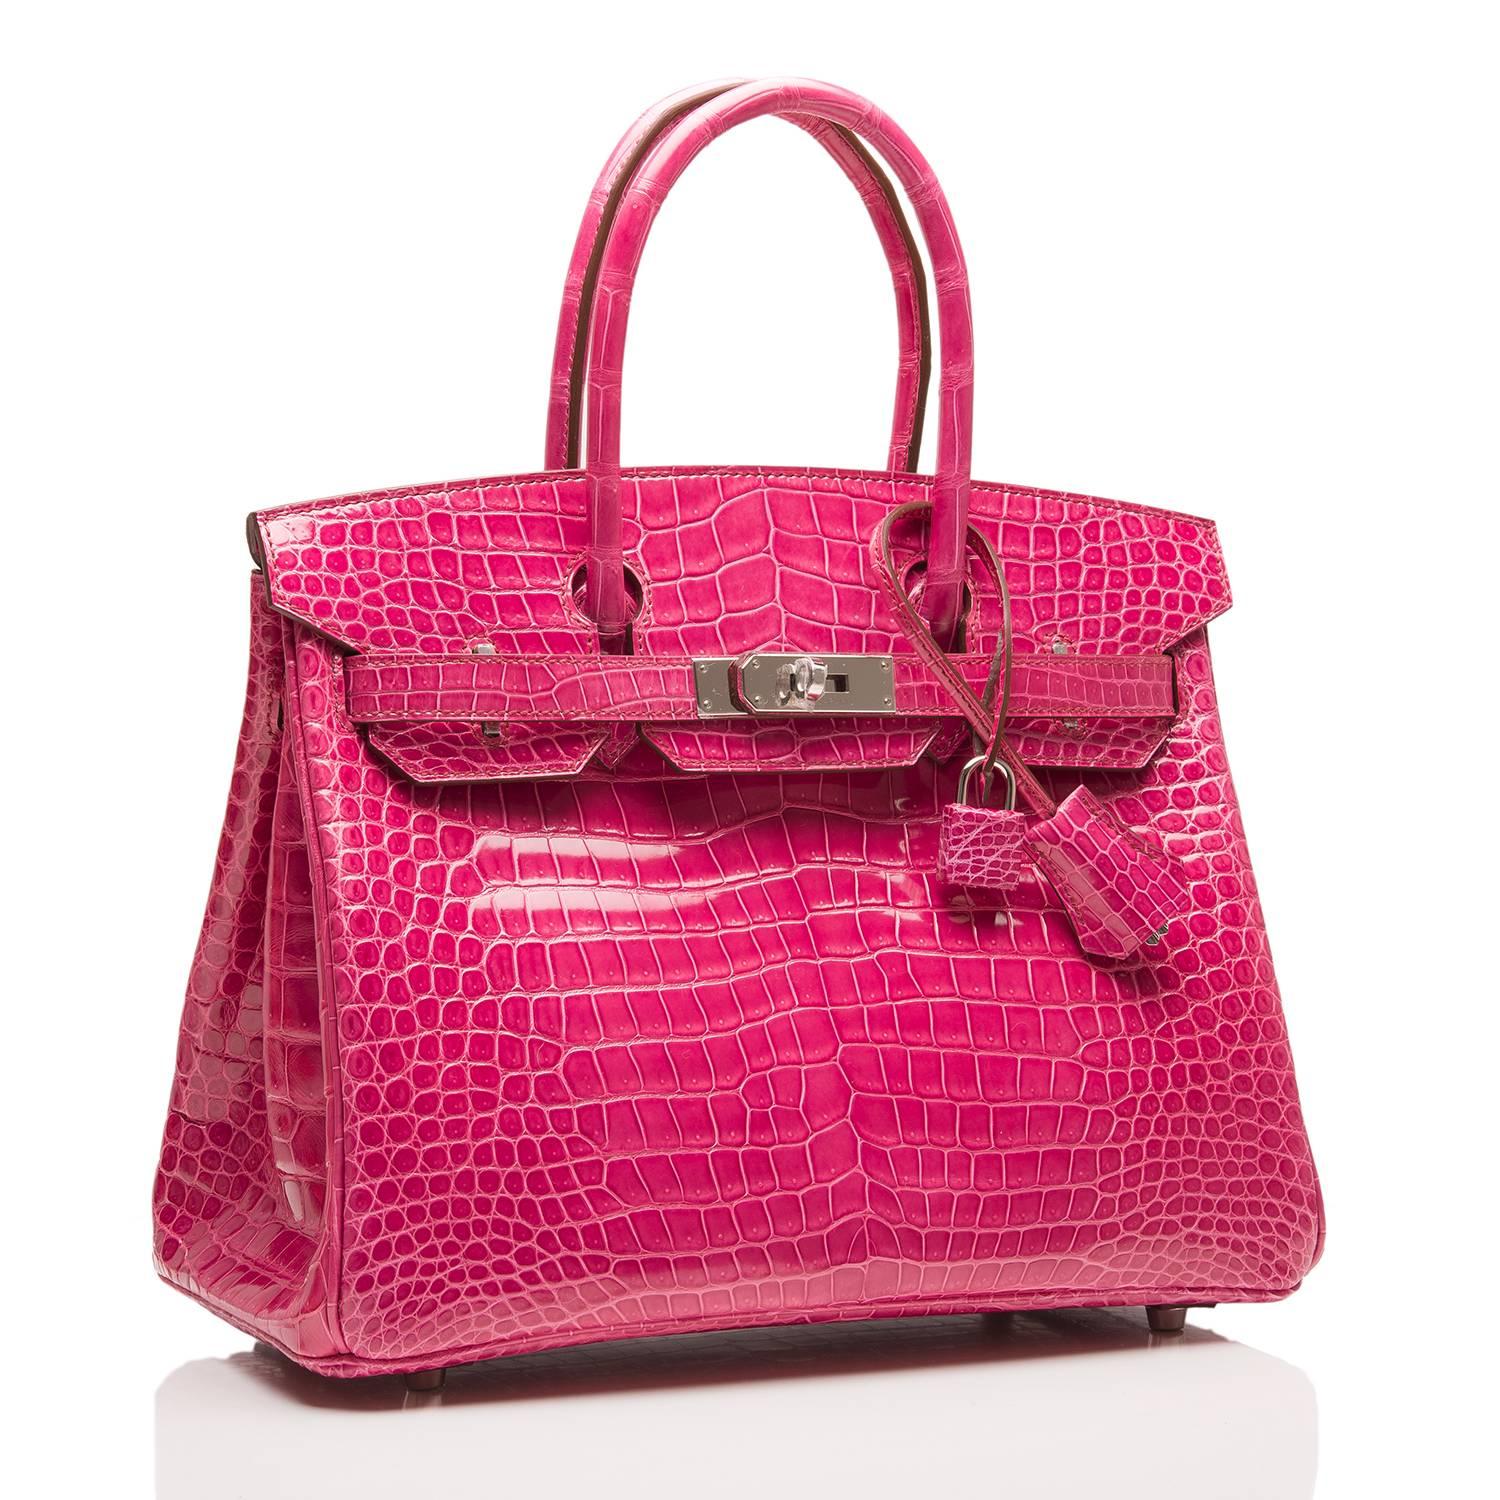 Hermes Fuchsia Birkin 30cm in shiny Porosus crocodile with palladium hardware.

This Birkin features tonal stitching, front toggle closure, clochette with lock and two keys, and double rolled handles. The interior is lined in Fuchsia chevre with